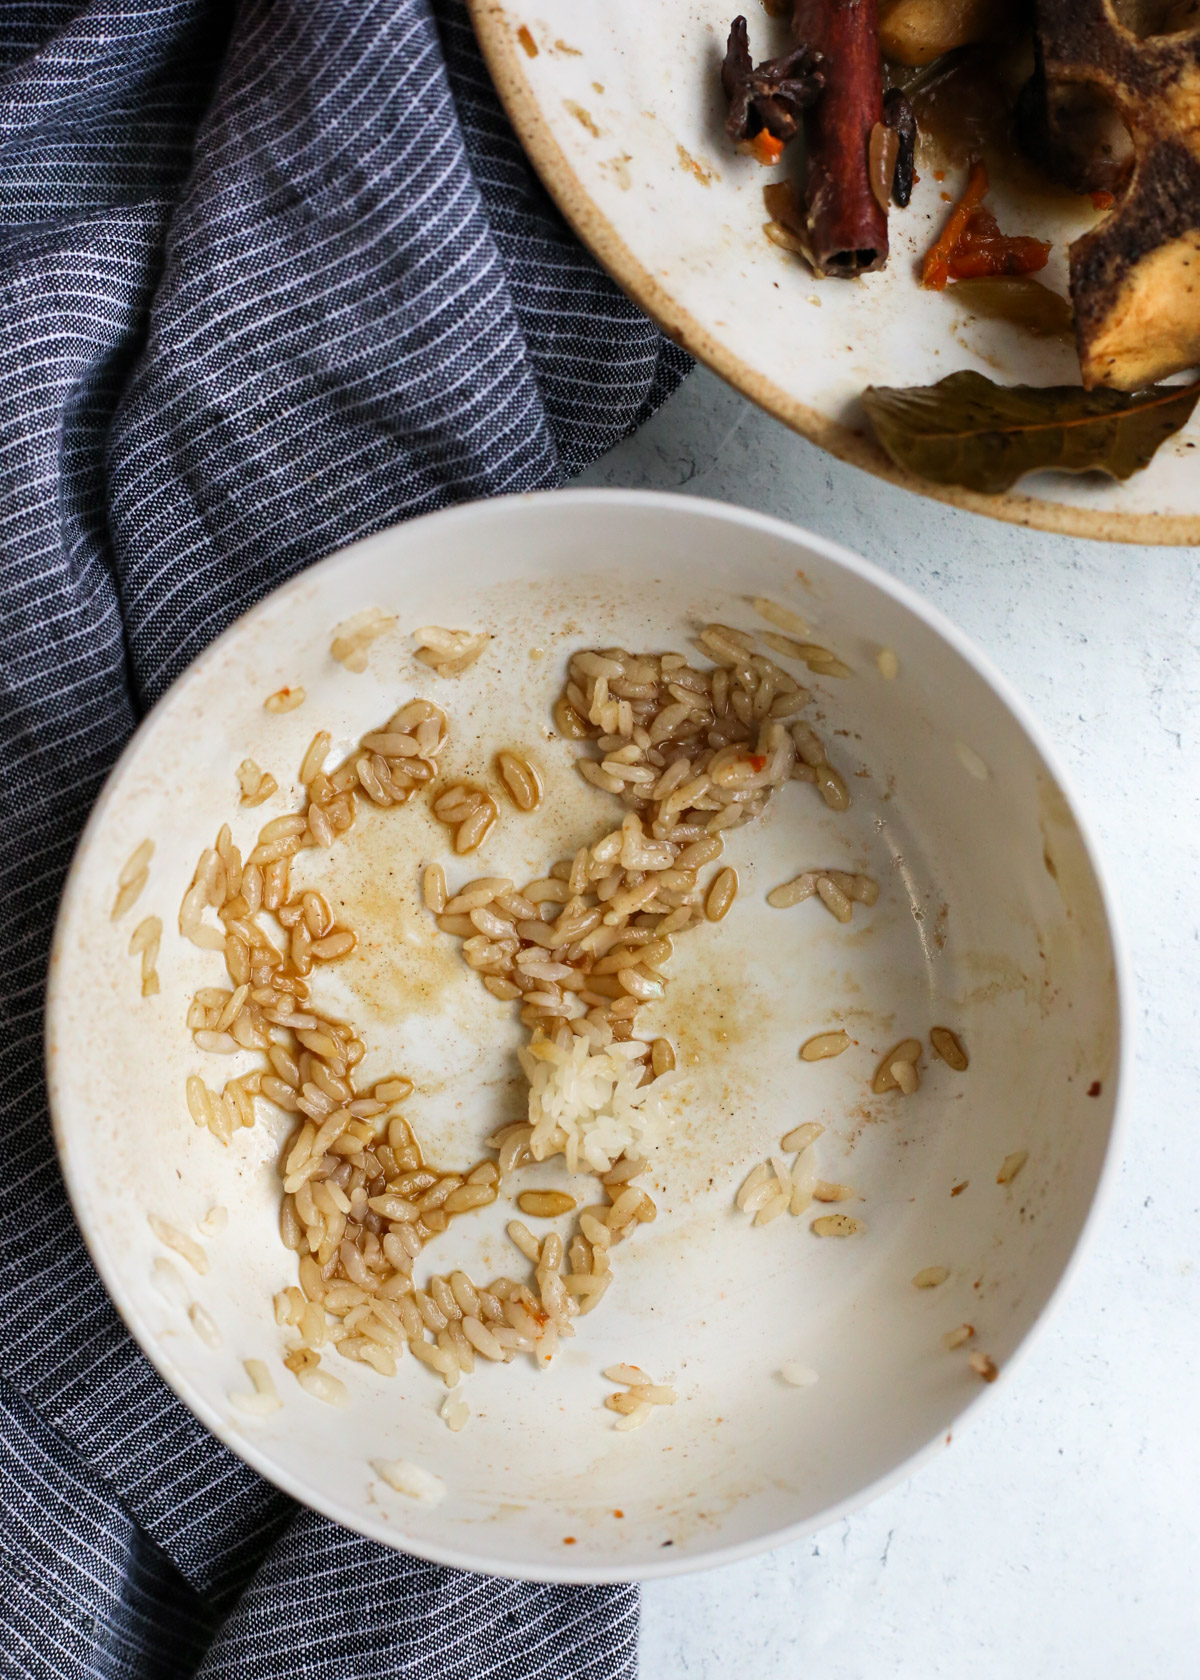 An empty ceramic bowl with remnants of white rice, spices, and a braising liquid 